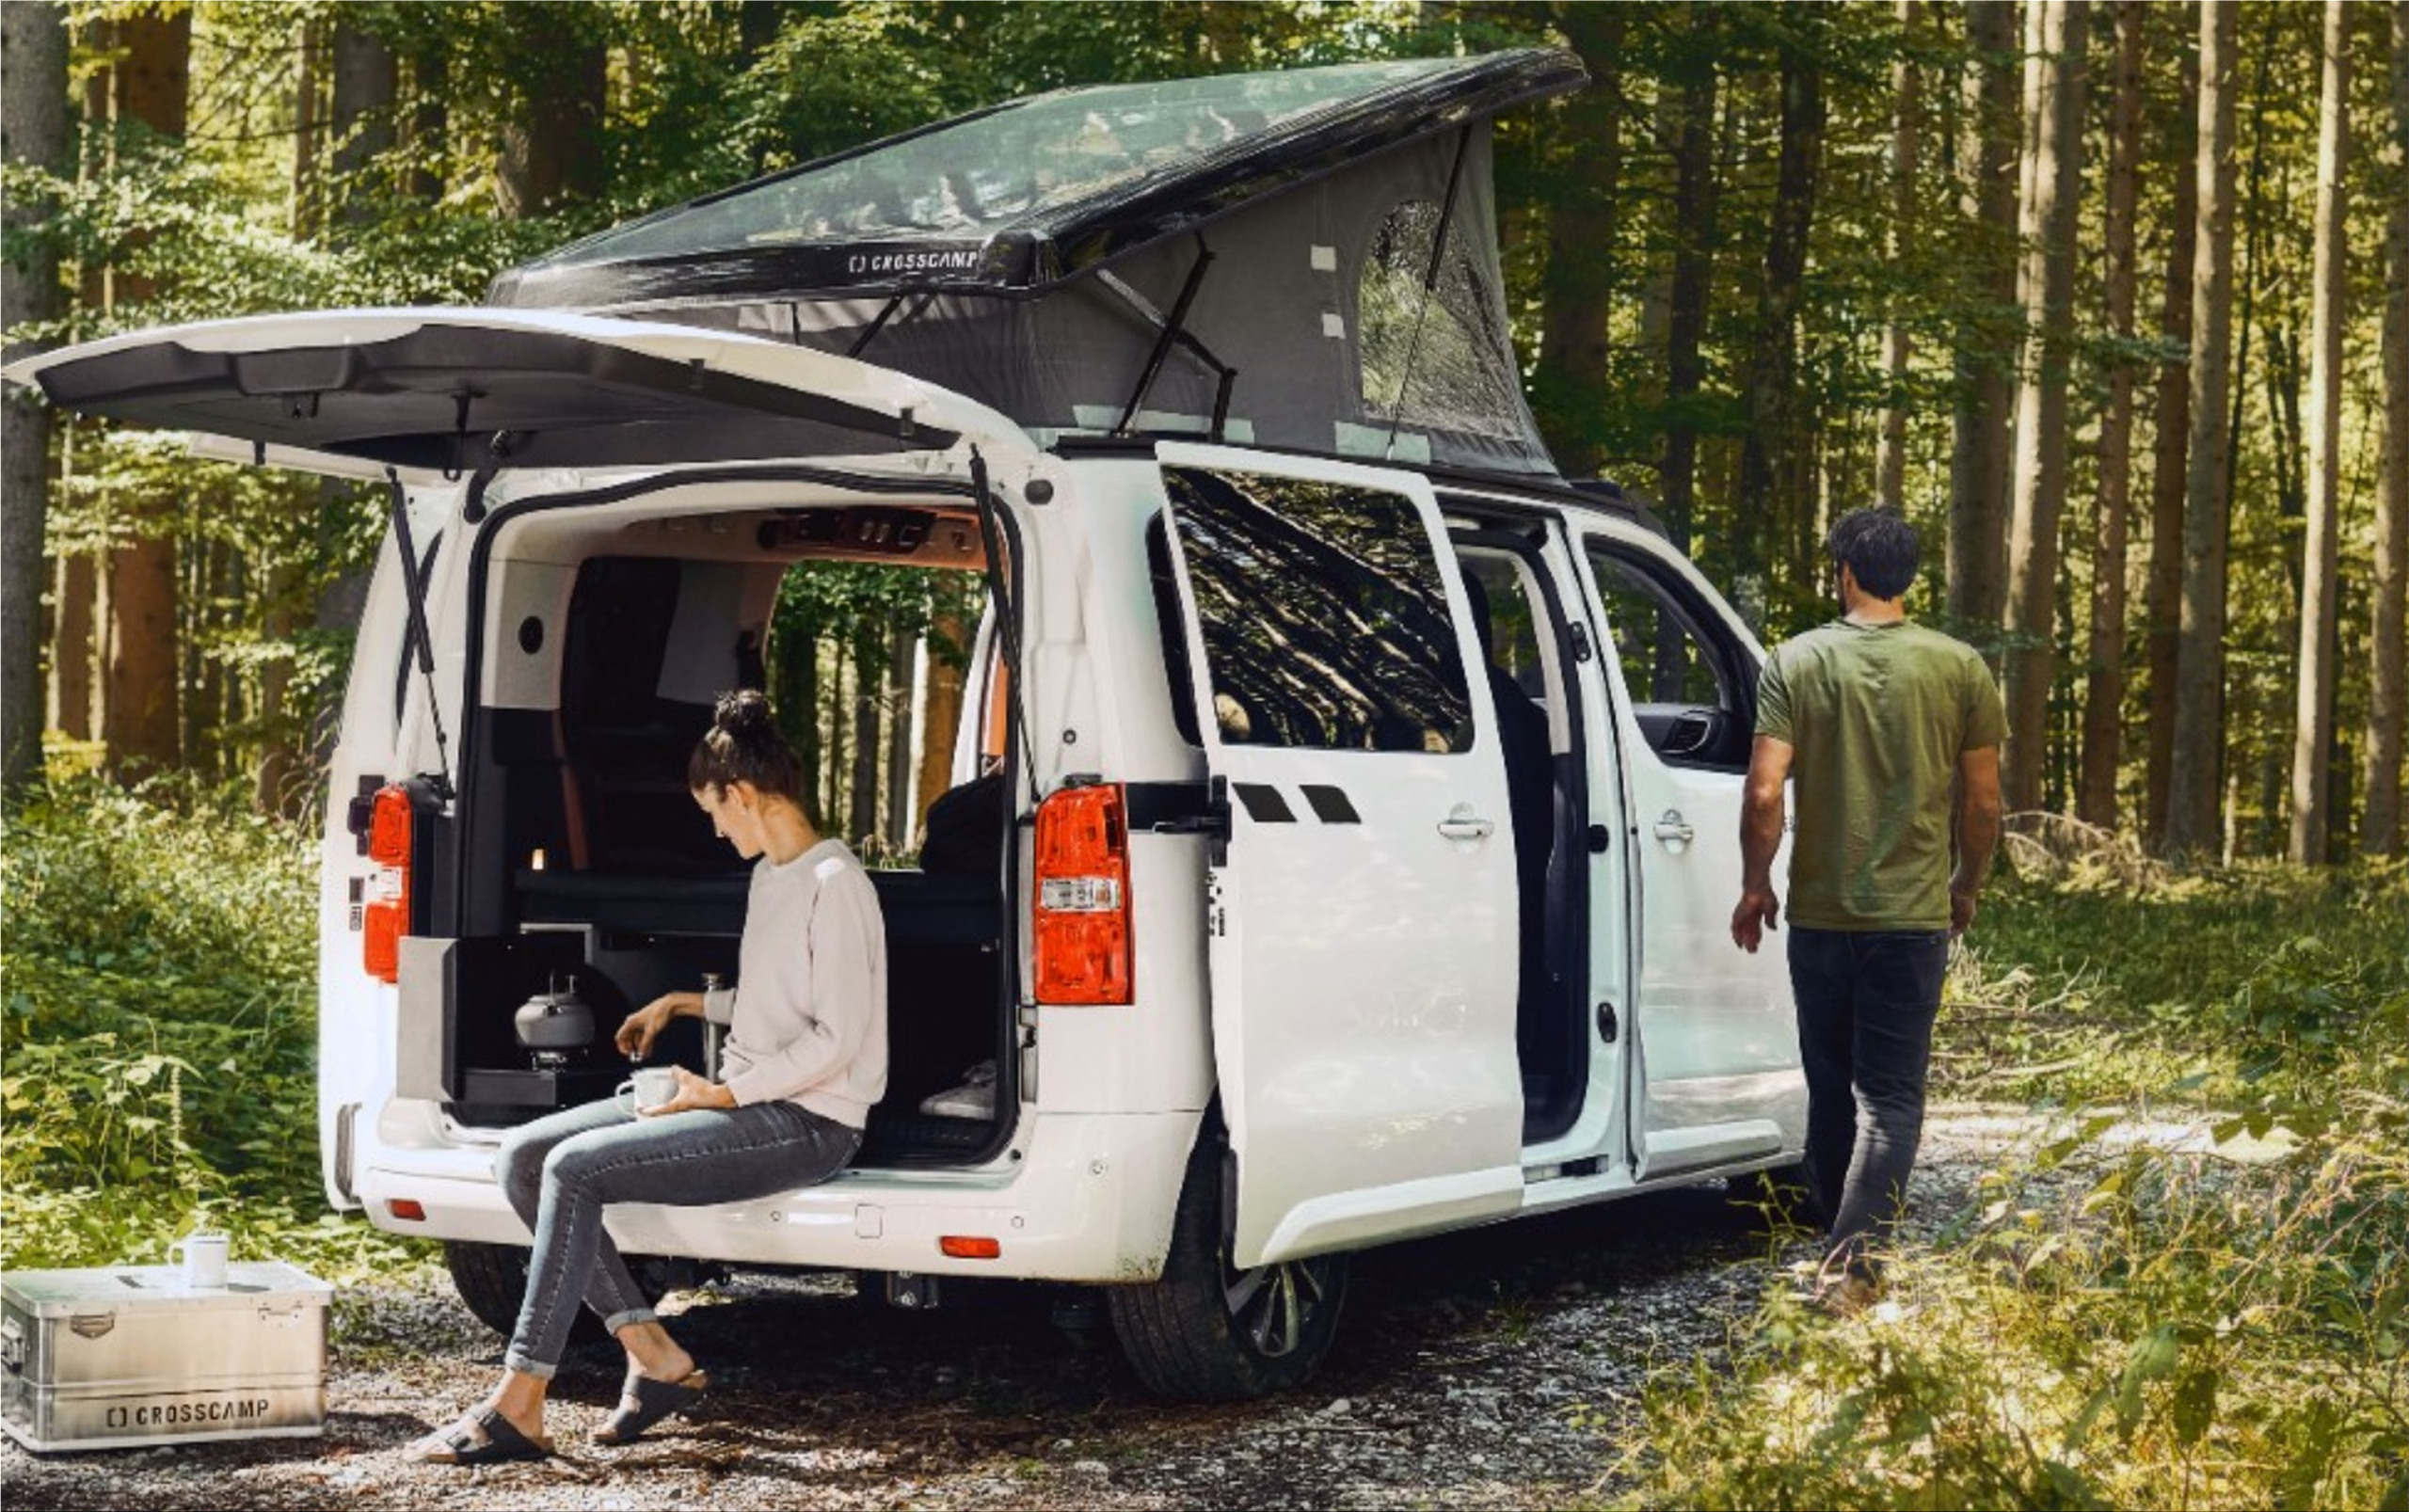 The new Opel Zafira Life is converted as the Crosscamp Flex electric  campervan